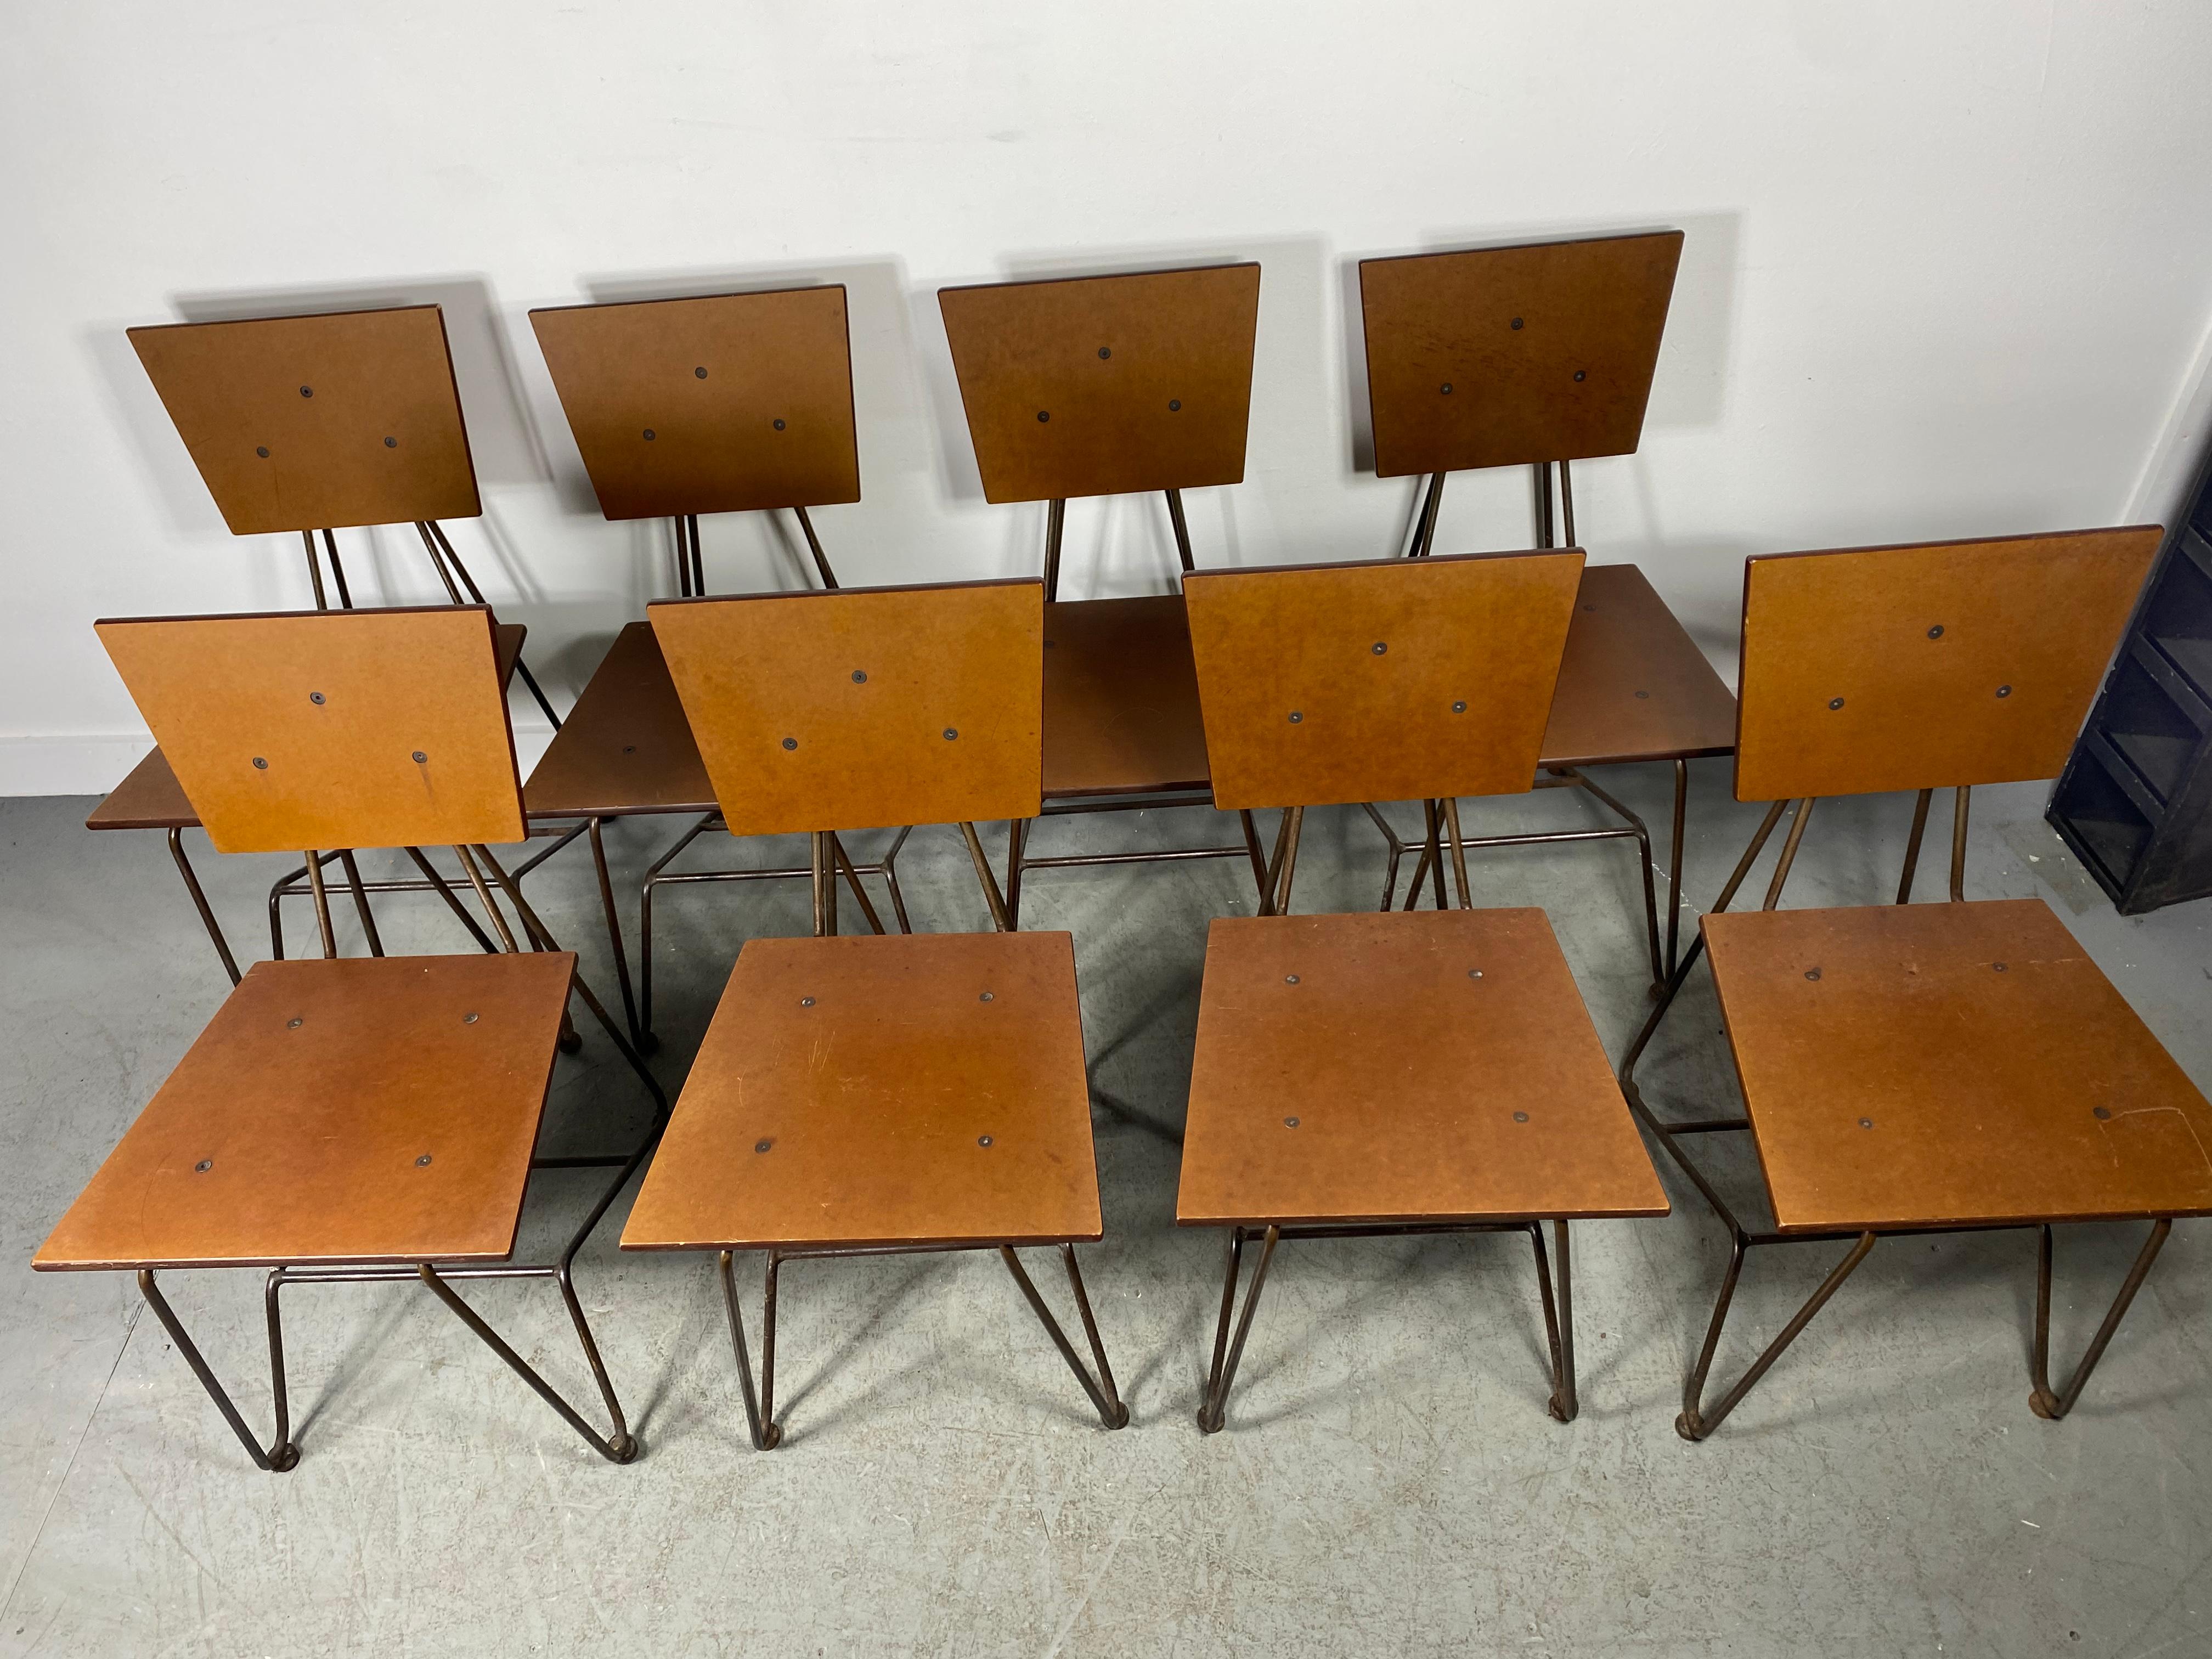 Set 8 Modernist Iron and Ply Dining Chairs Designed by Steve Sauer In Good Condition For Sale In Buffalo, NY